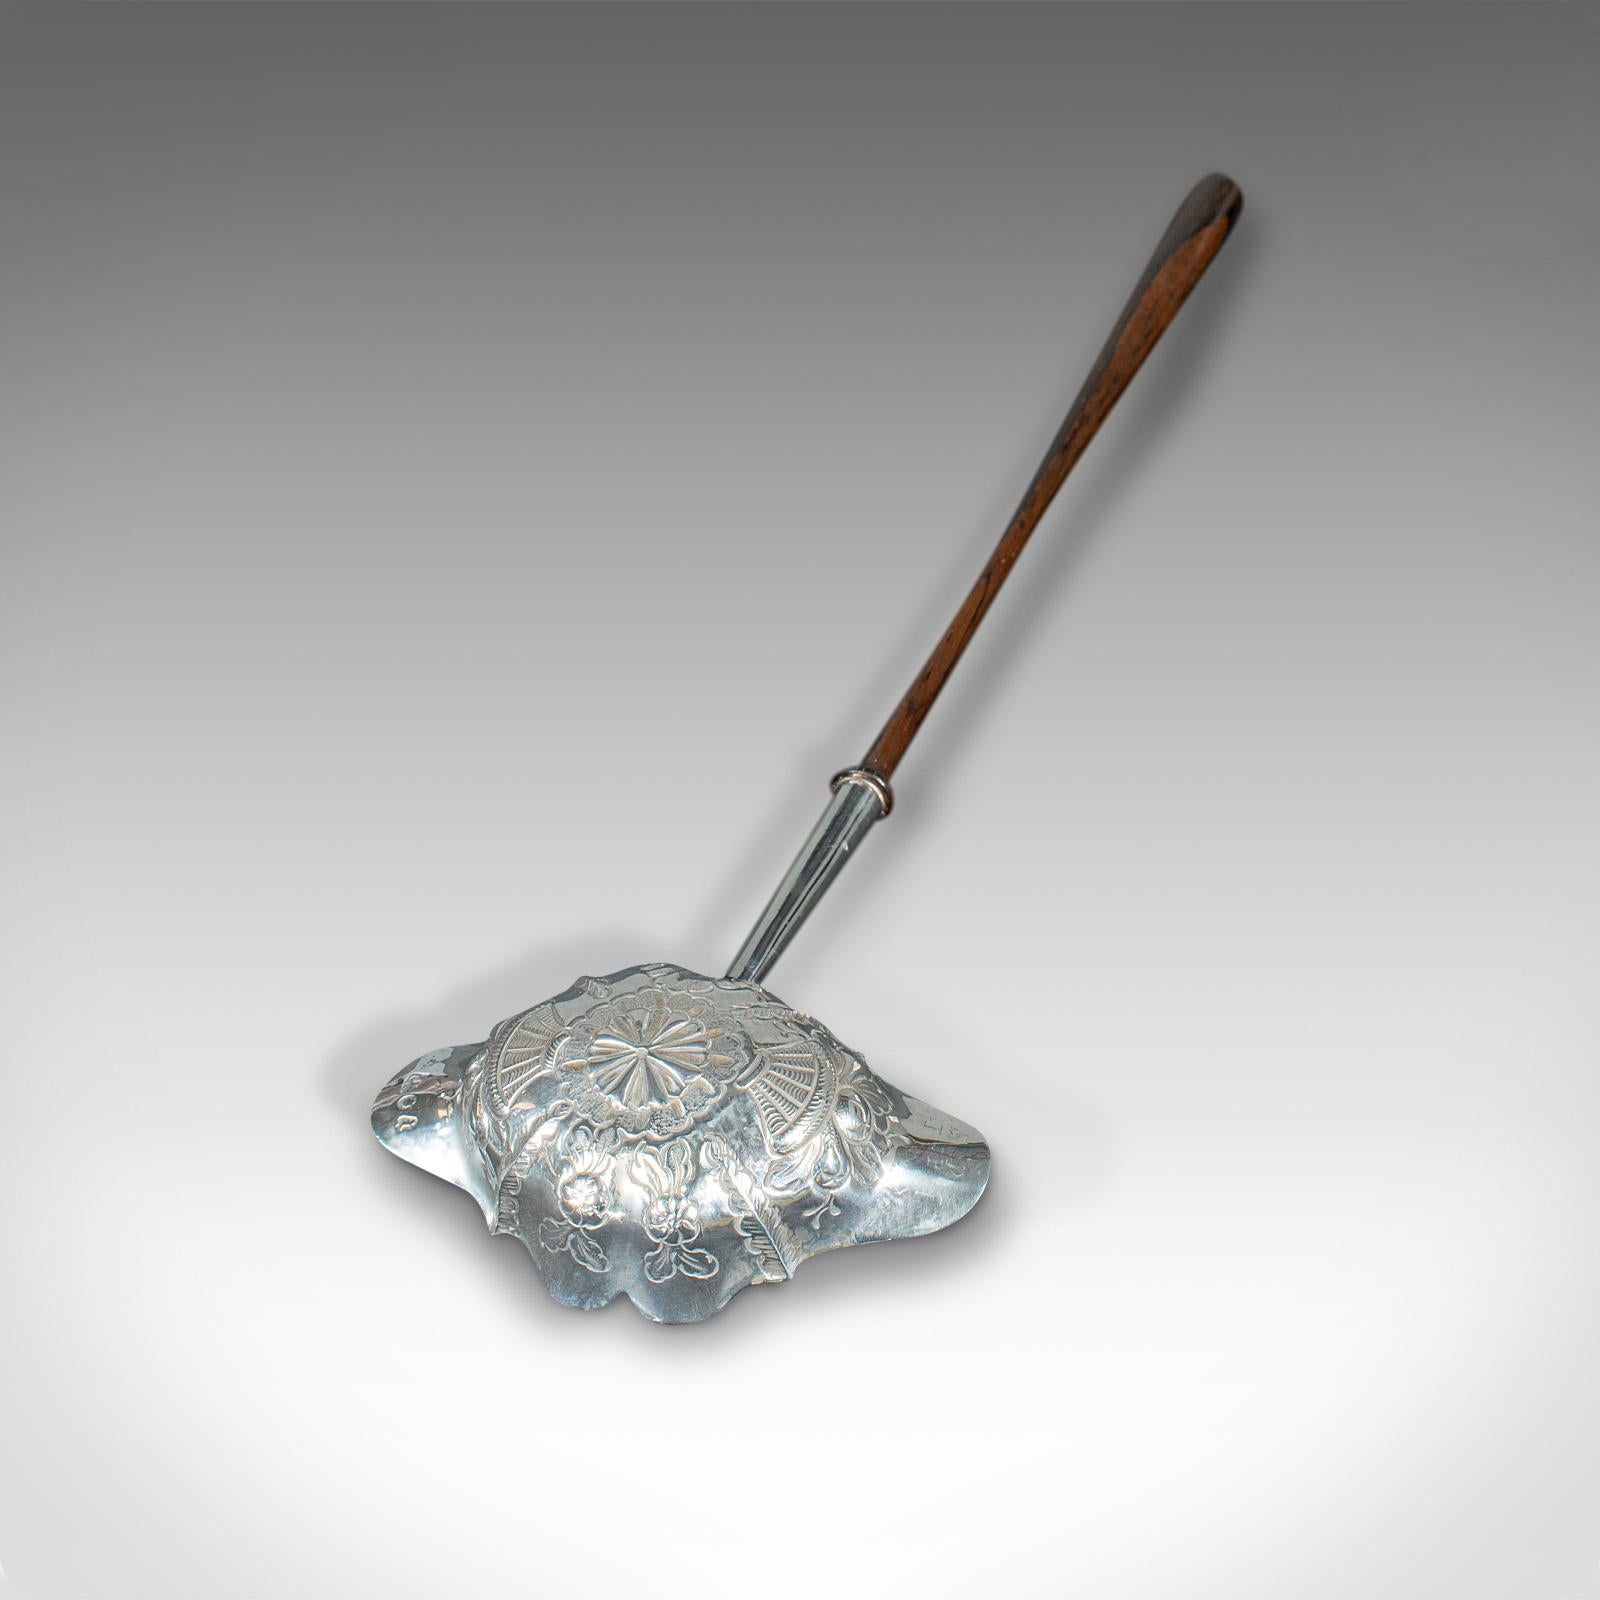 British Antique Toddy Spoon, English, Silver, Serving Ladle, William Kinman, Georgian For Sale